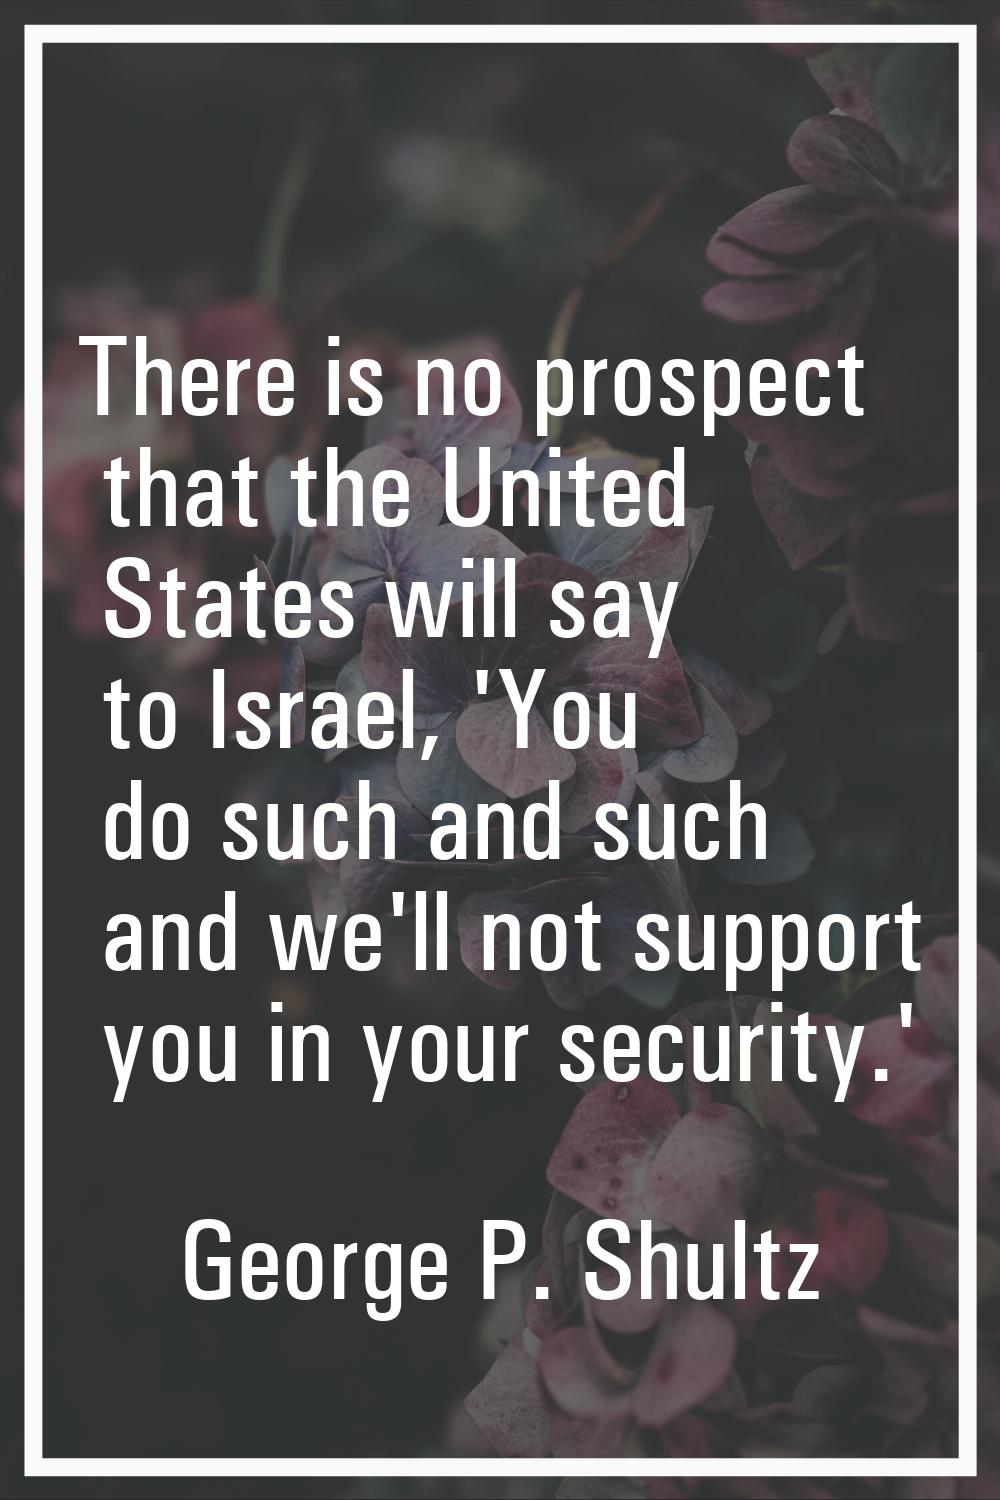 There is no prospect that the United States will say to Israel, 'You do such and such and we'll not